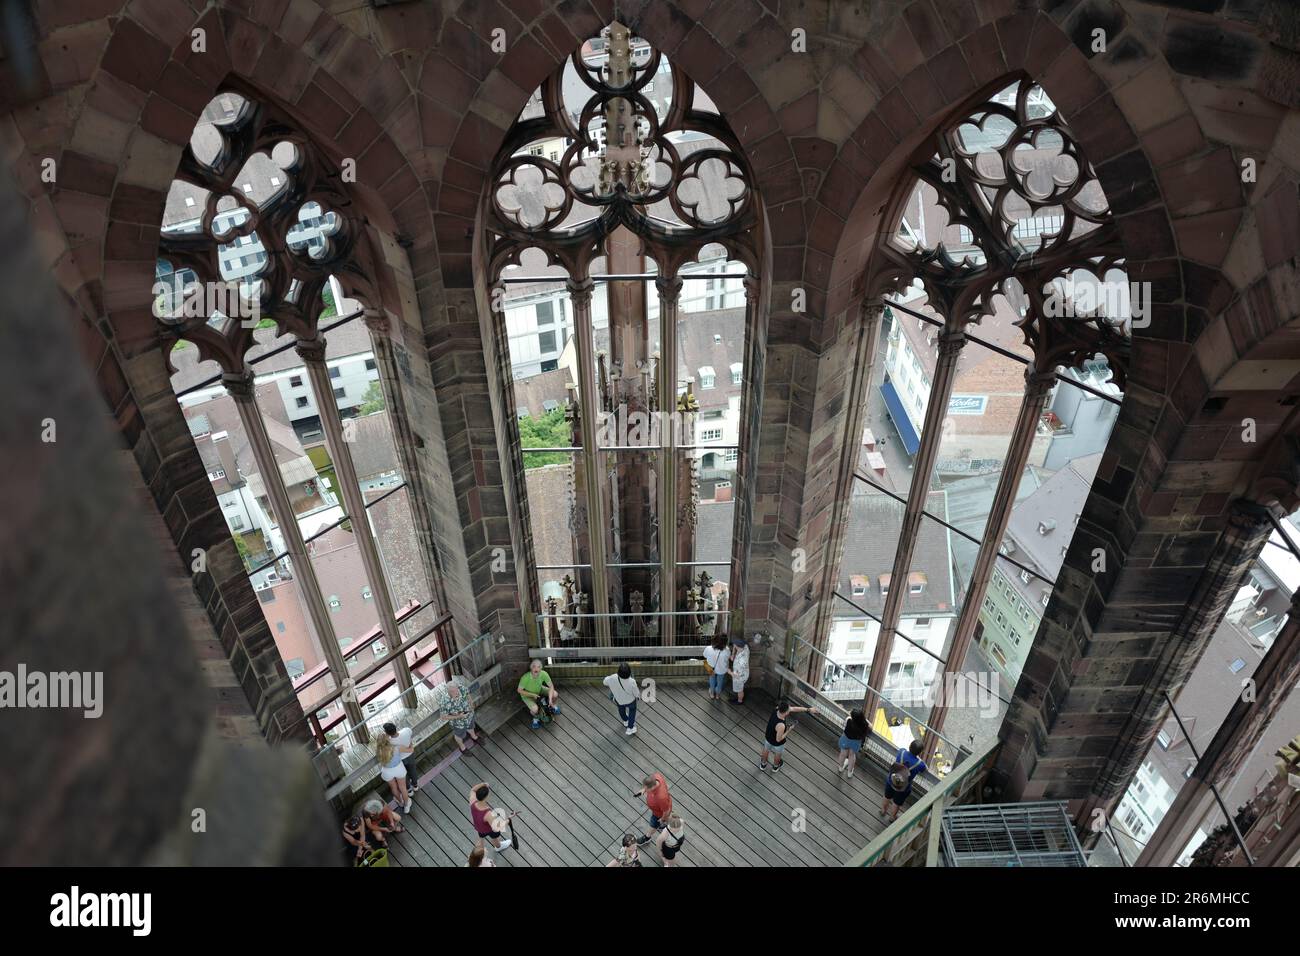 View inside the bell tower of the Freiburg cathedral Stock Photo